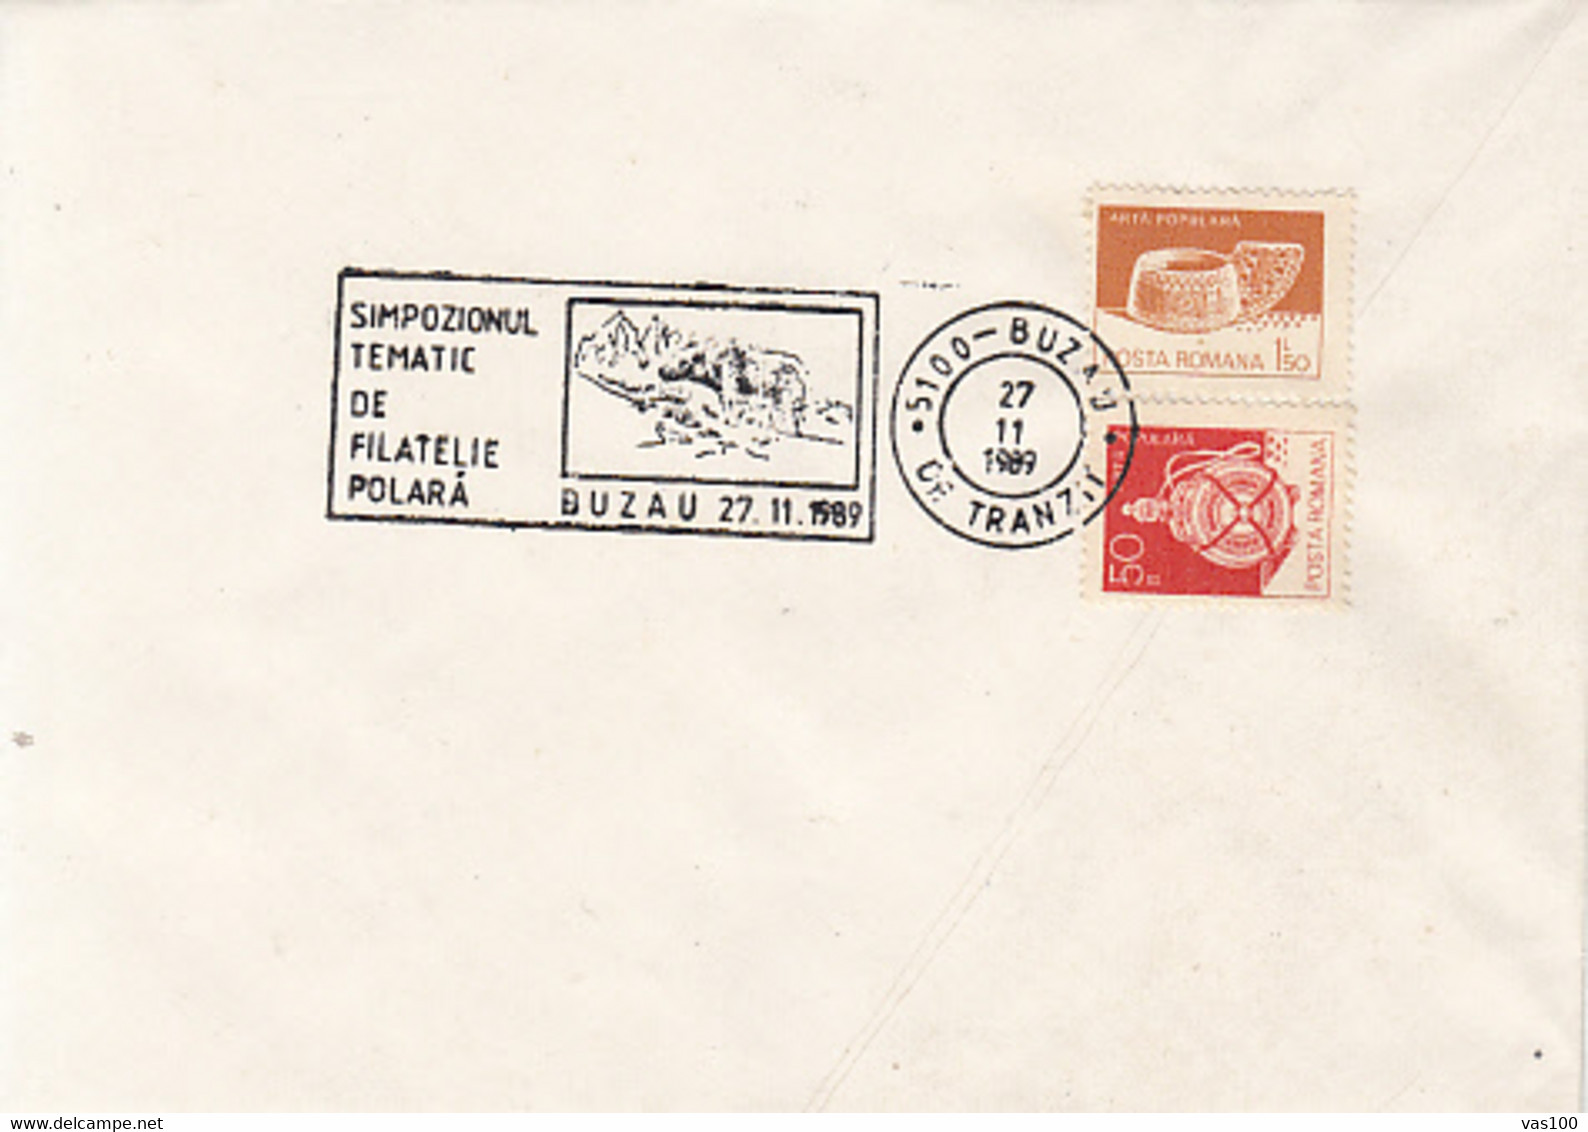 POLAR PHILATELY, EVENTS, POLAR PHILAELIC EXHIBITION SPECIAL POSTMARK, FOLKLORE ART STAMPS ON COVER, 1989, ROMANIA - Events & Commemorations